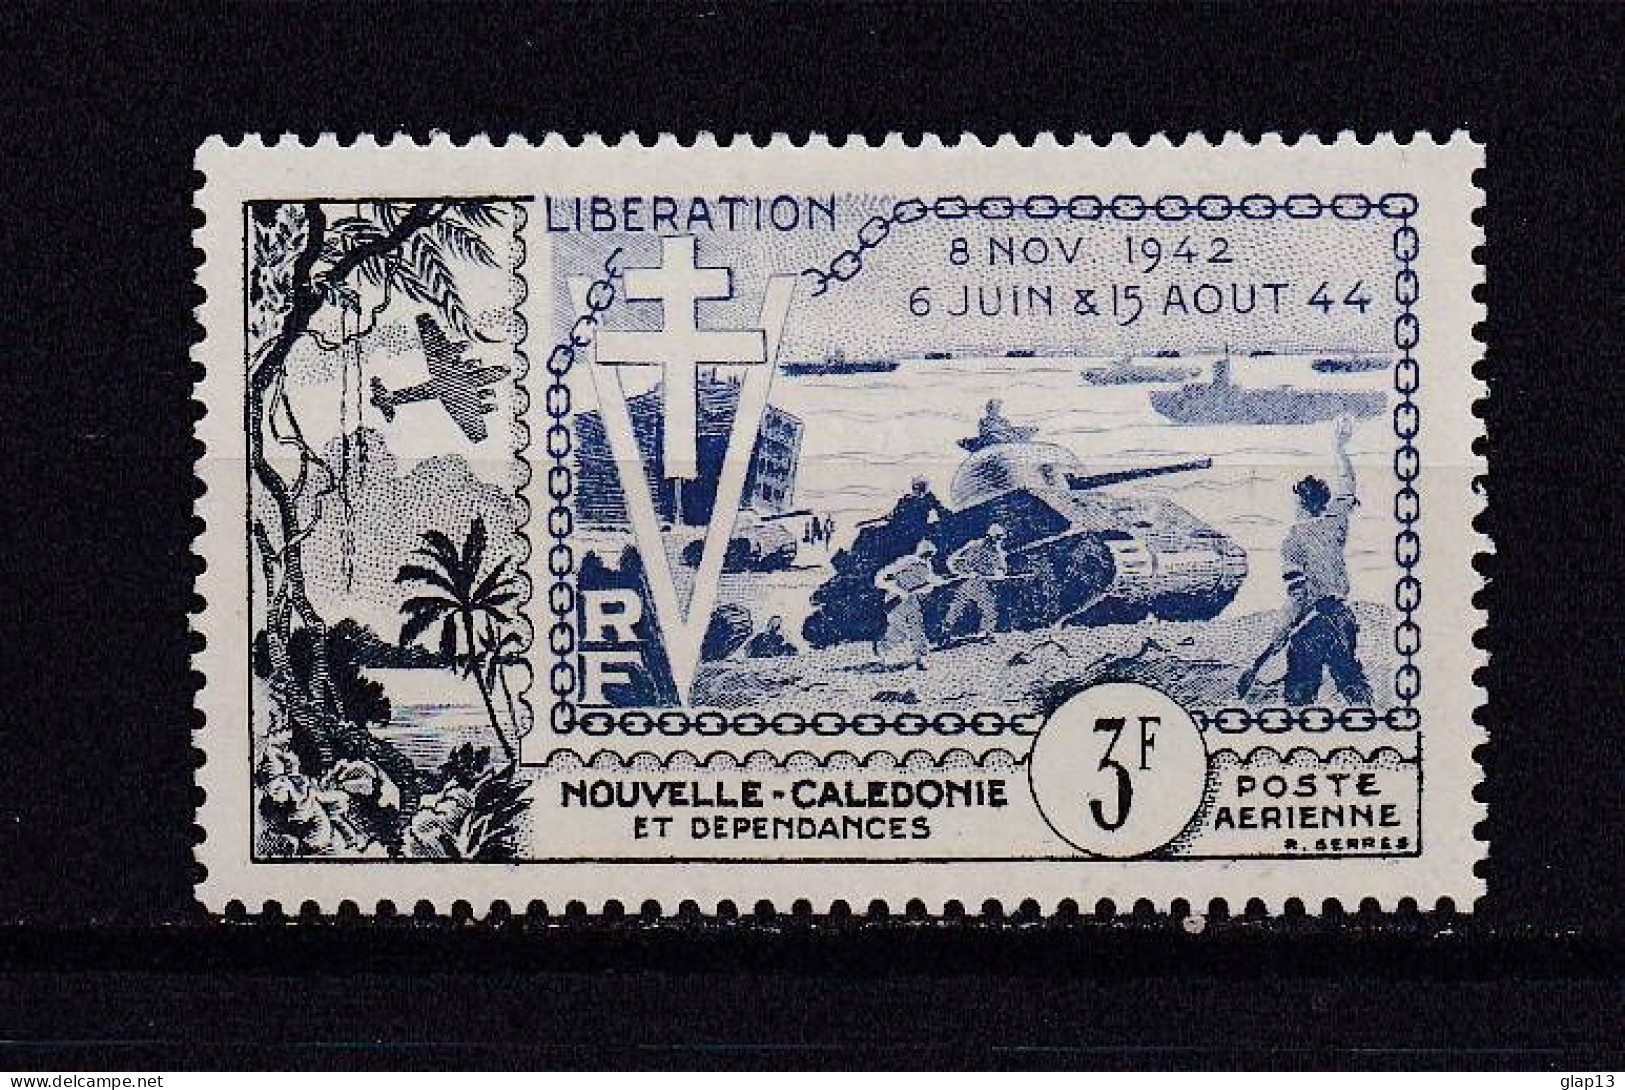 NOUVELLE-CALEDONIE 1954 PA N°65 NEUF AVEC CHARNIERE LIBERATION - Nuovi